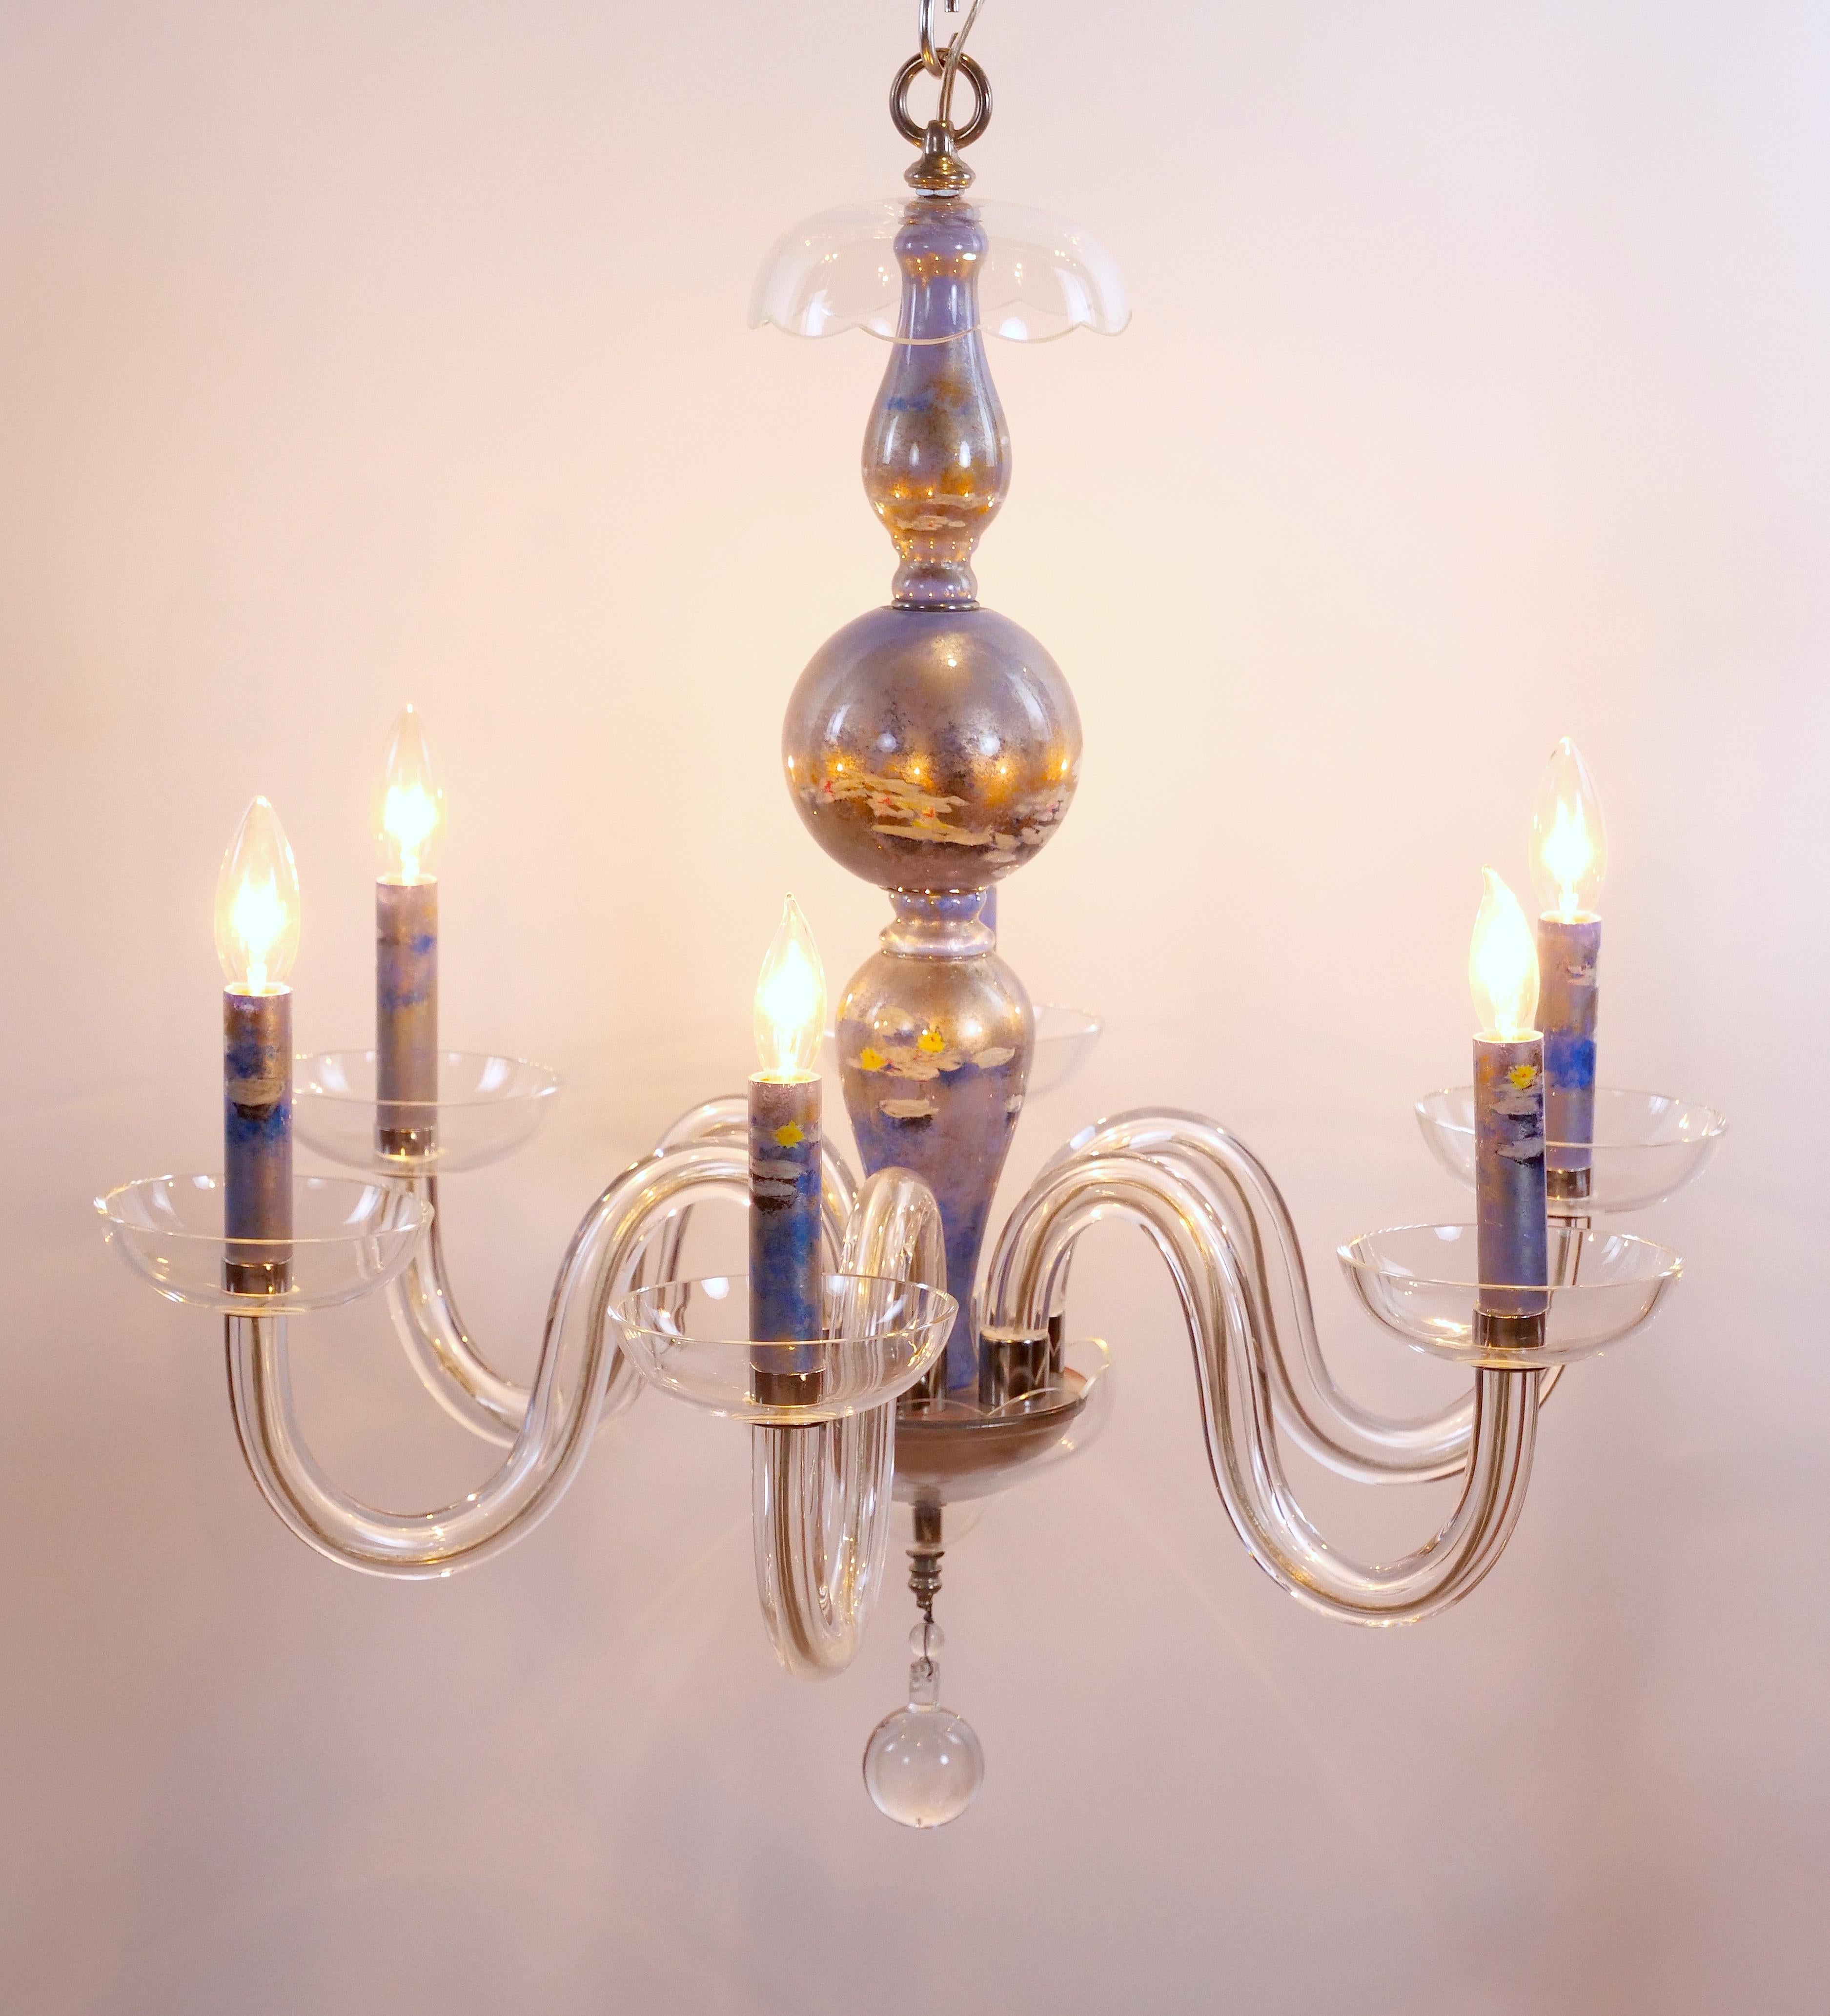 
Elevate your space with this exquisite Venetian Italian glass chandelier, handcrafted from clear blown glass and adorned with delicate silvered accents. The candle covers, tastefully designed, feature intricate hand painted water lilies set against